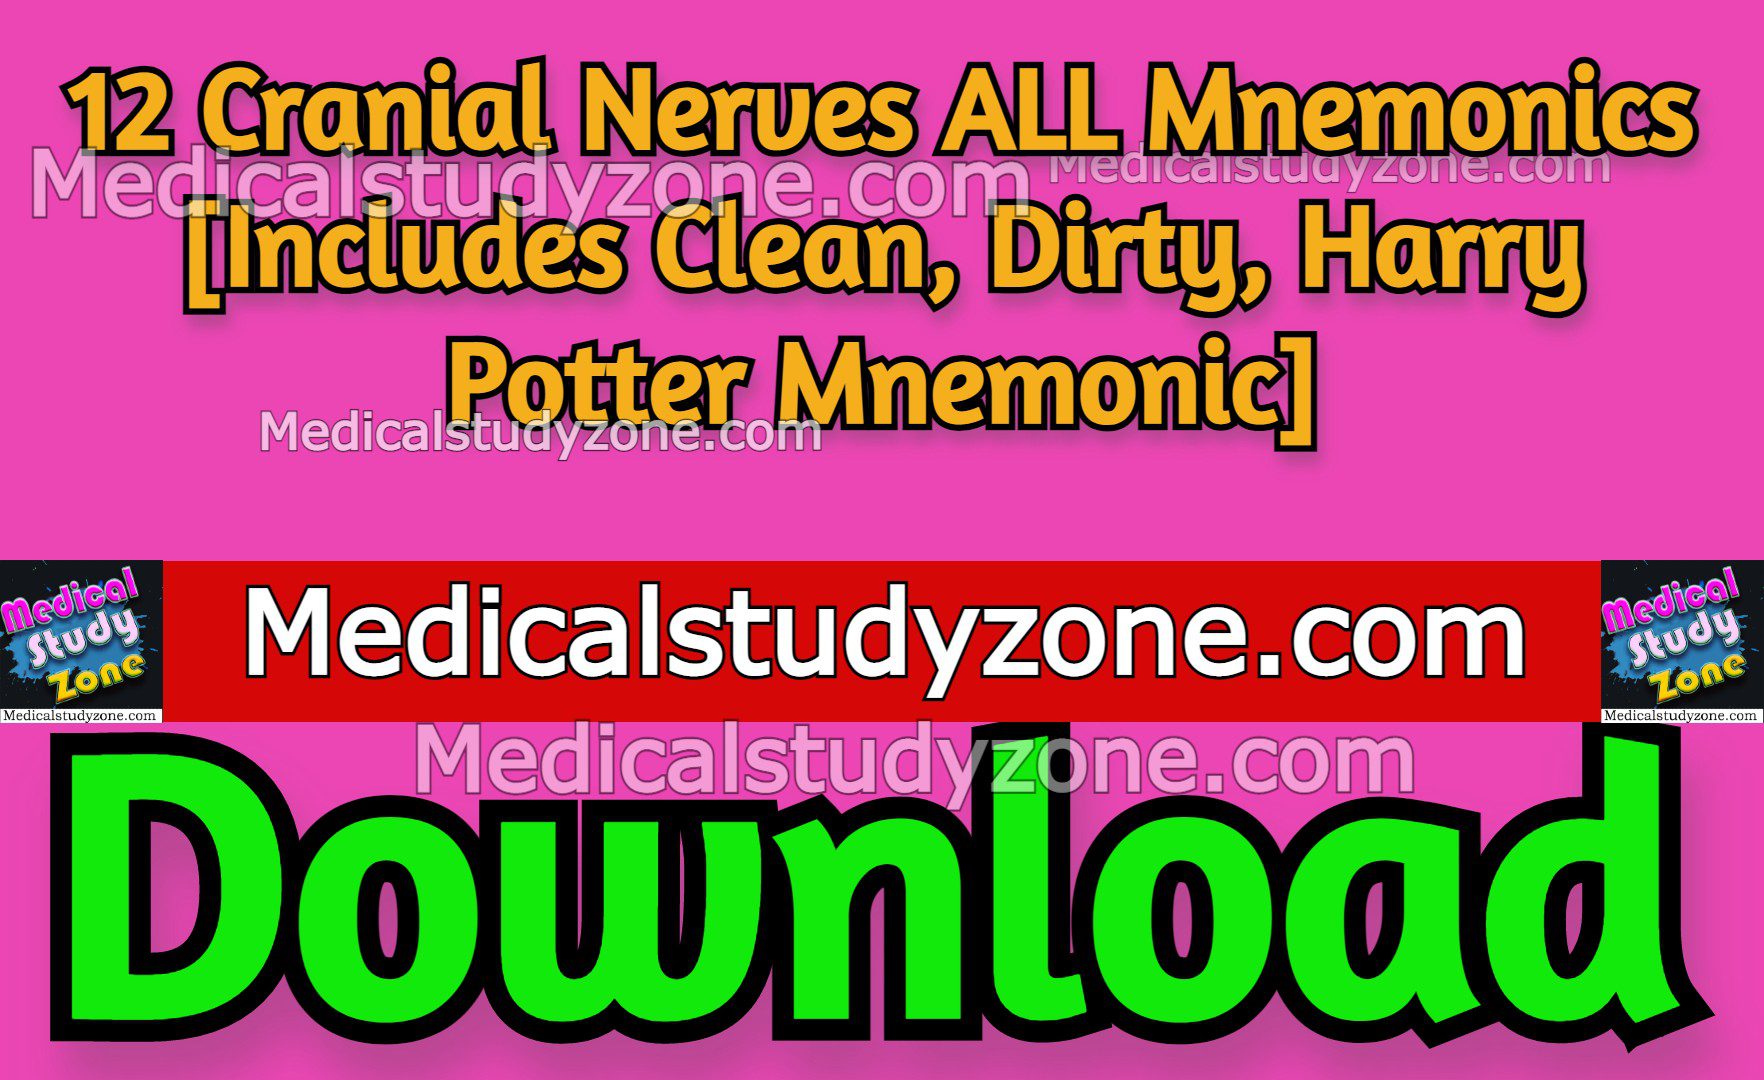 12 Cranial Nerves ALL Mnemonics 2023 [Includes Clean, Dirty, Harry Potter Mnemonic]